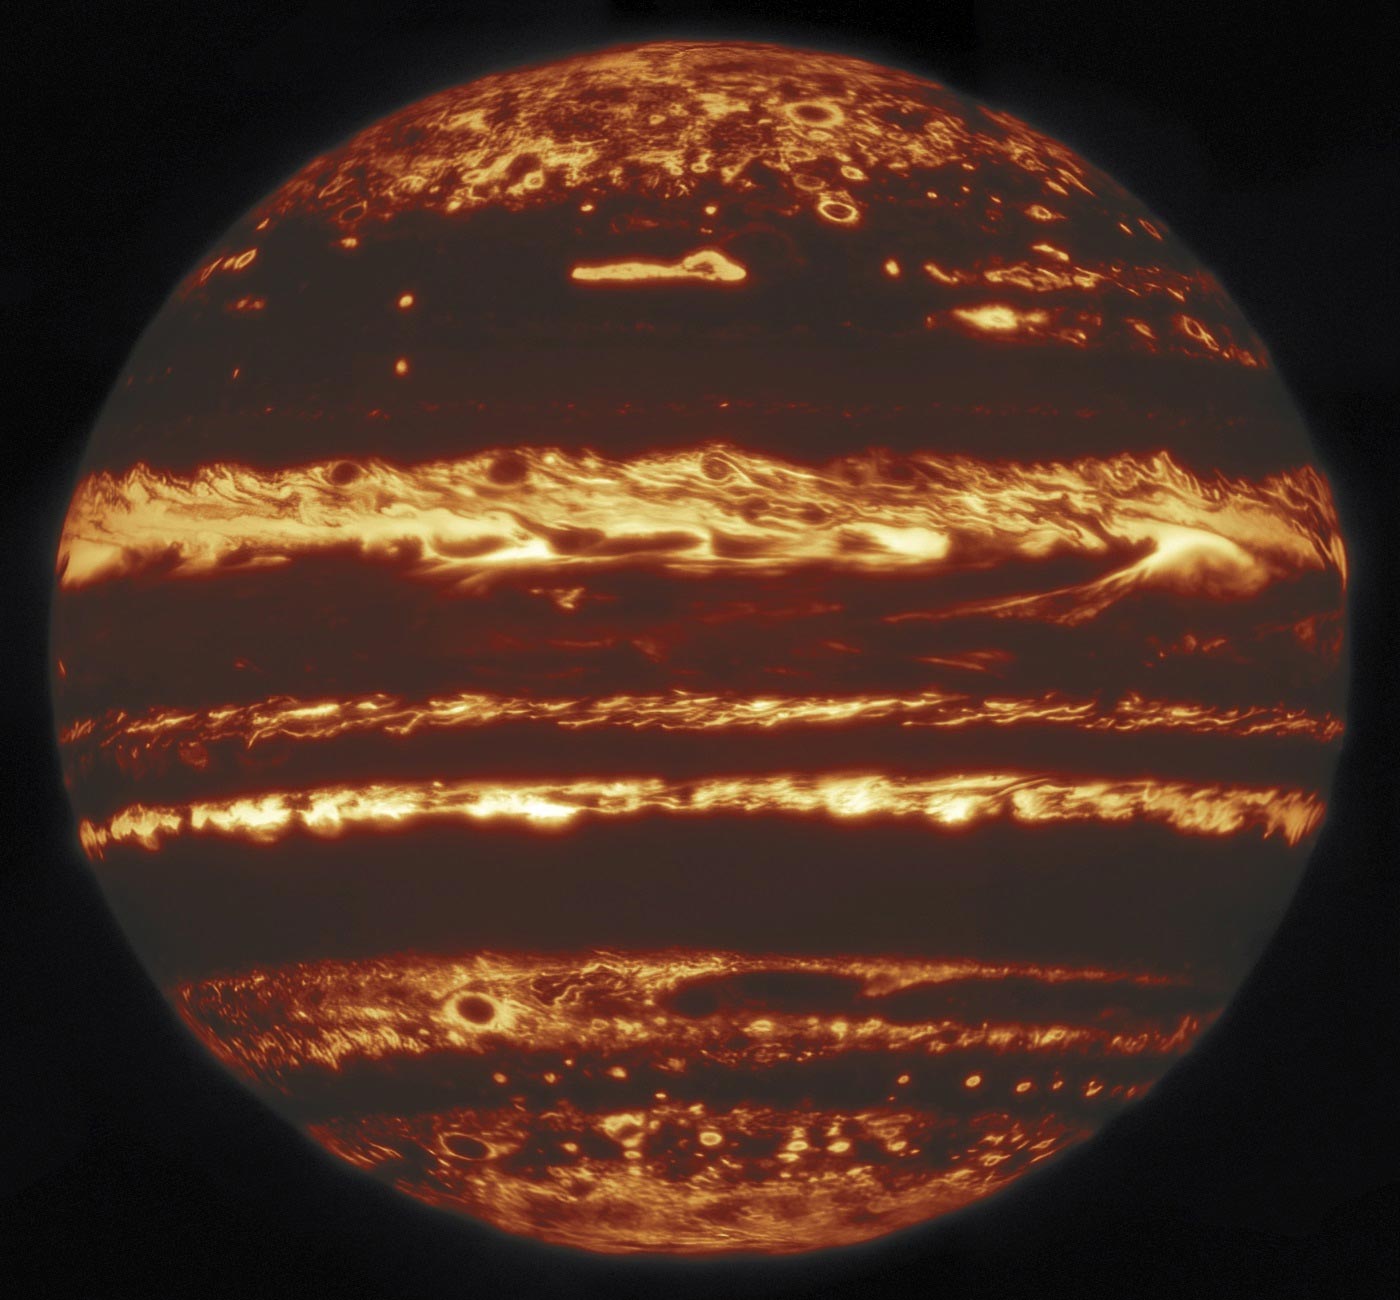 Amazing Look at Jupiter’s Incredible Storms Using Ground and Space